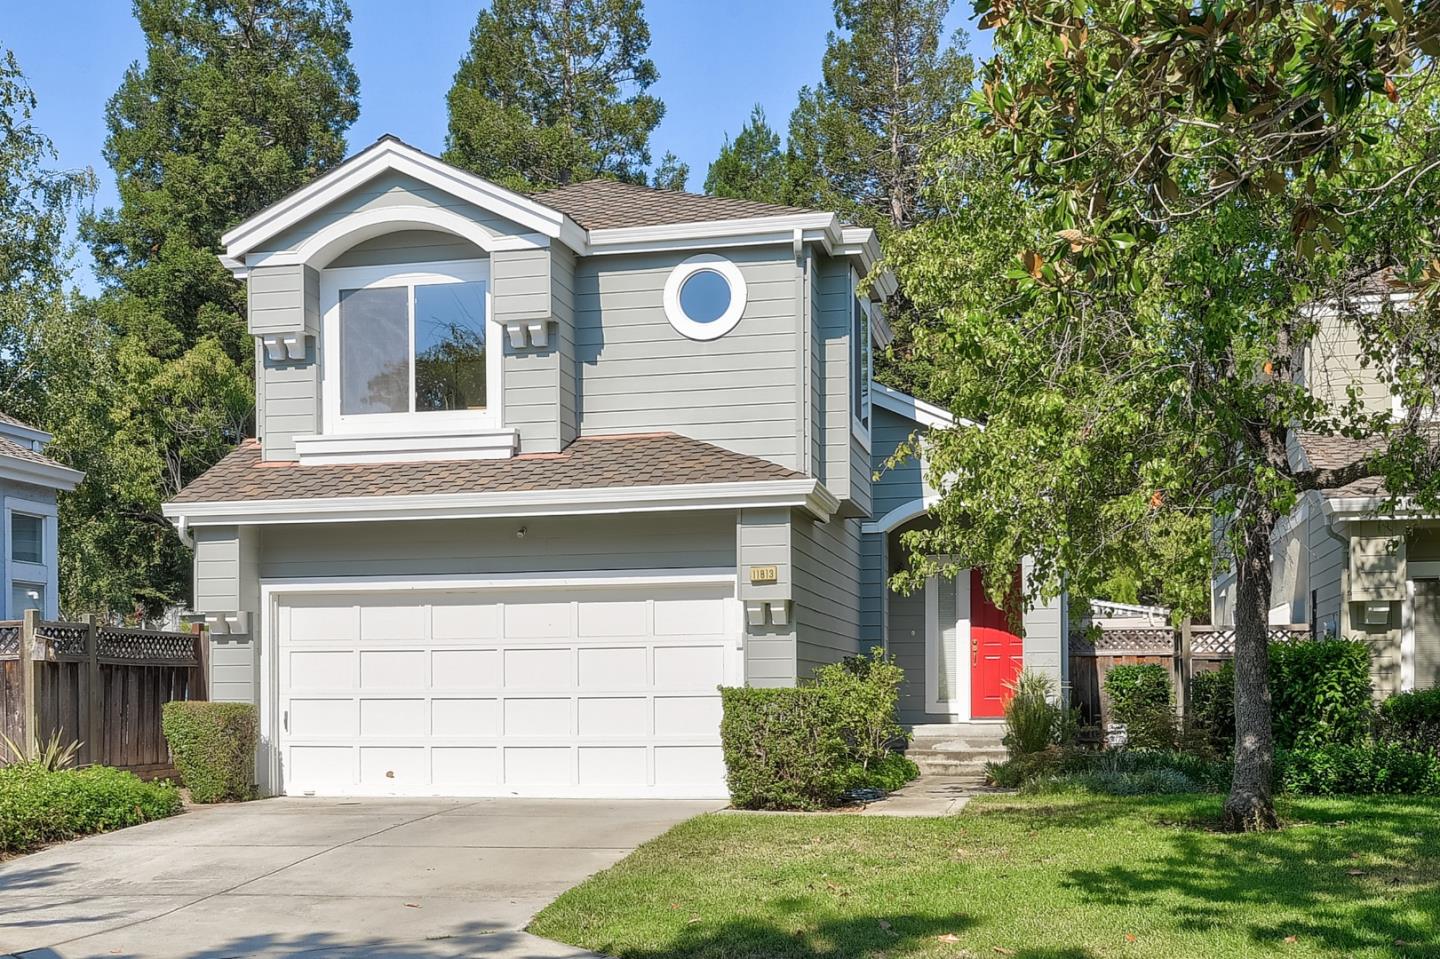 11813 Trinity Spring Ct, Cupertino, CA 95014 3 Beds 2/1 Baths (Sold